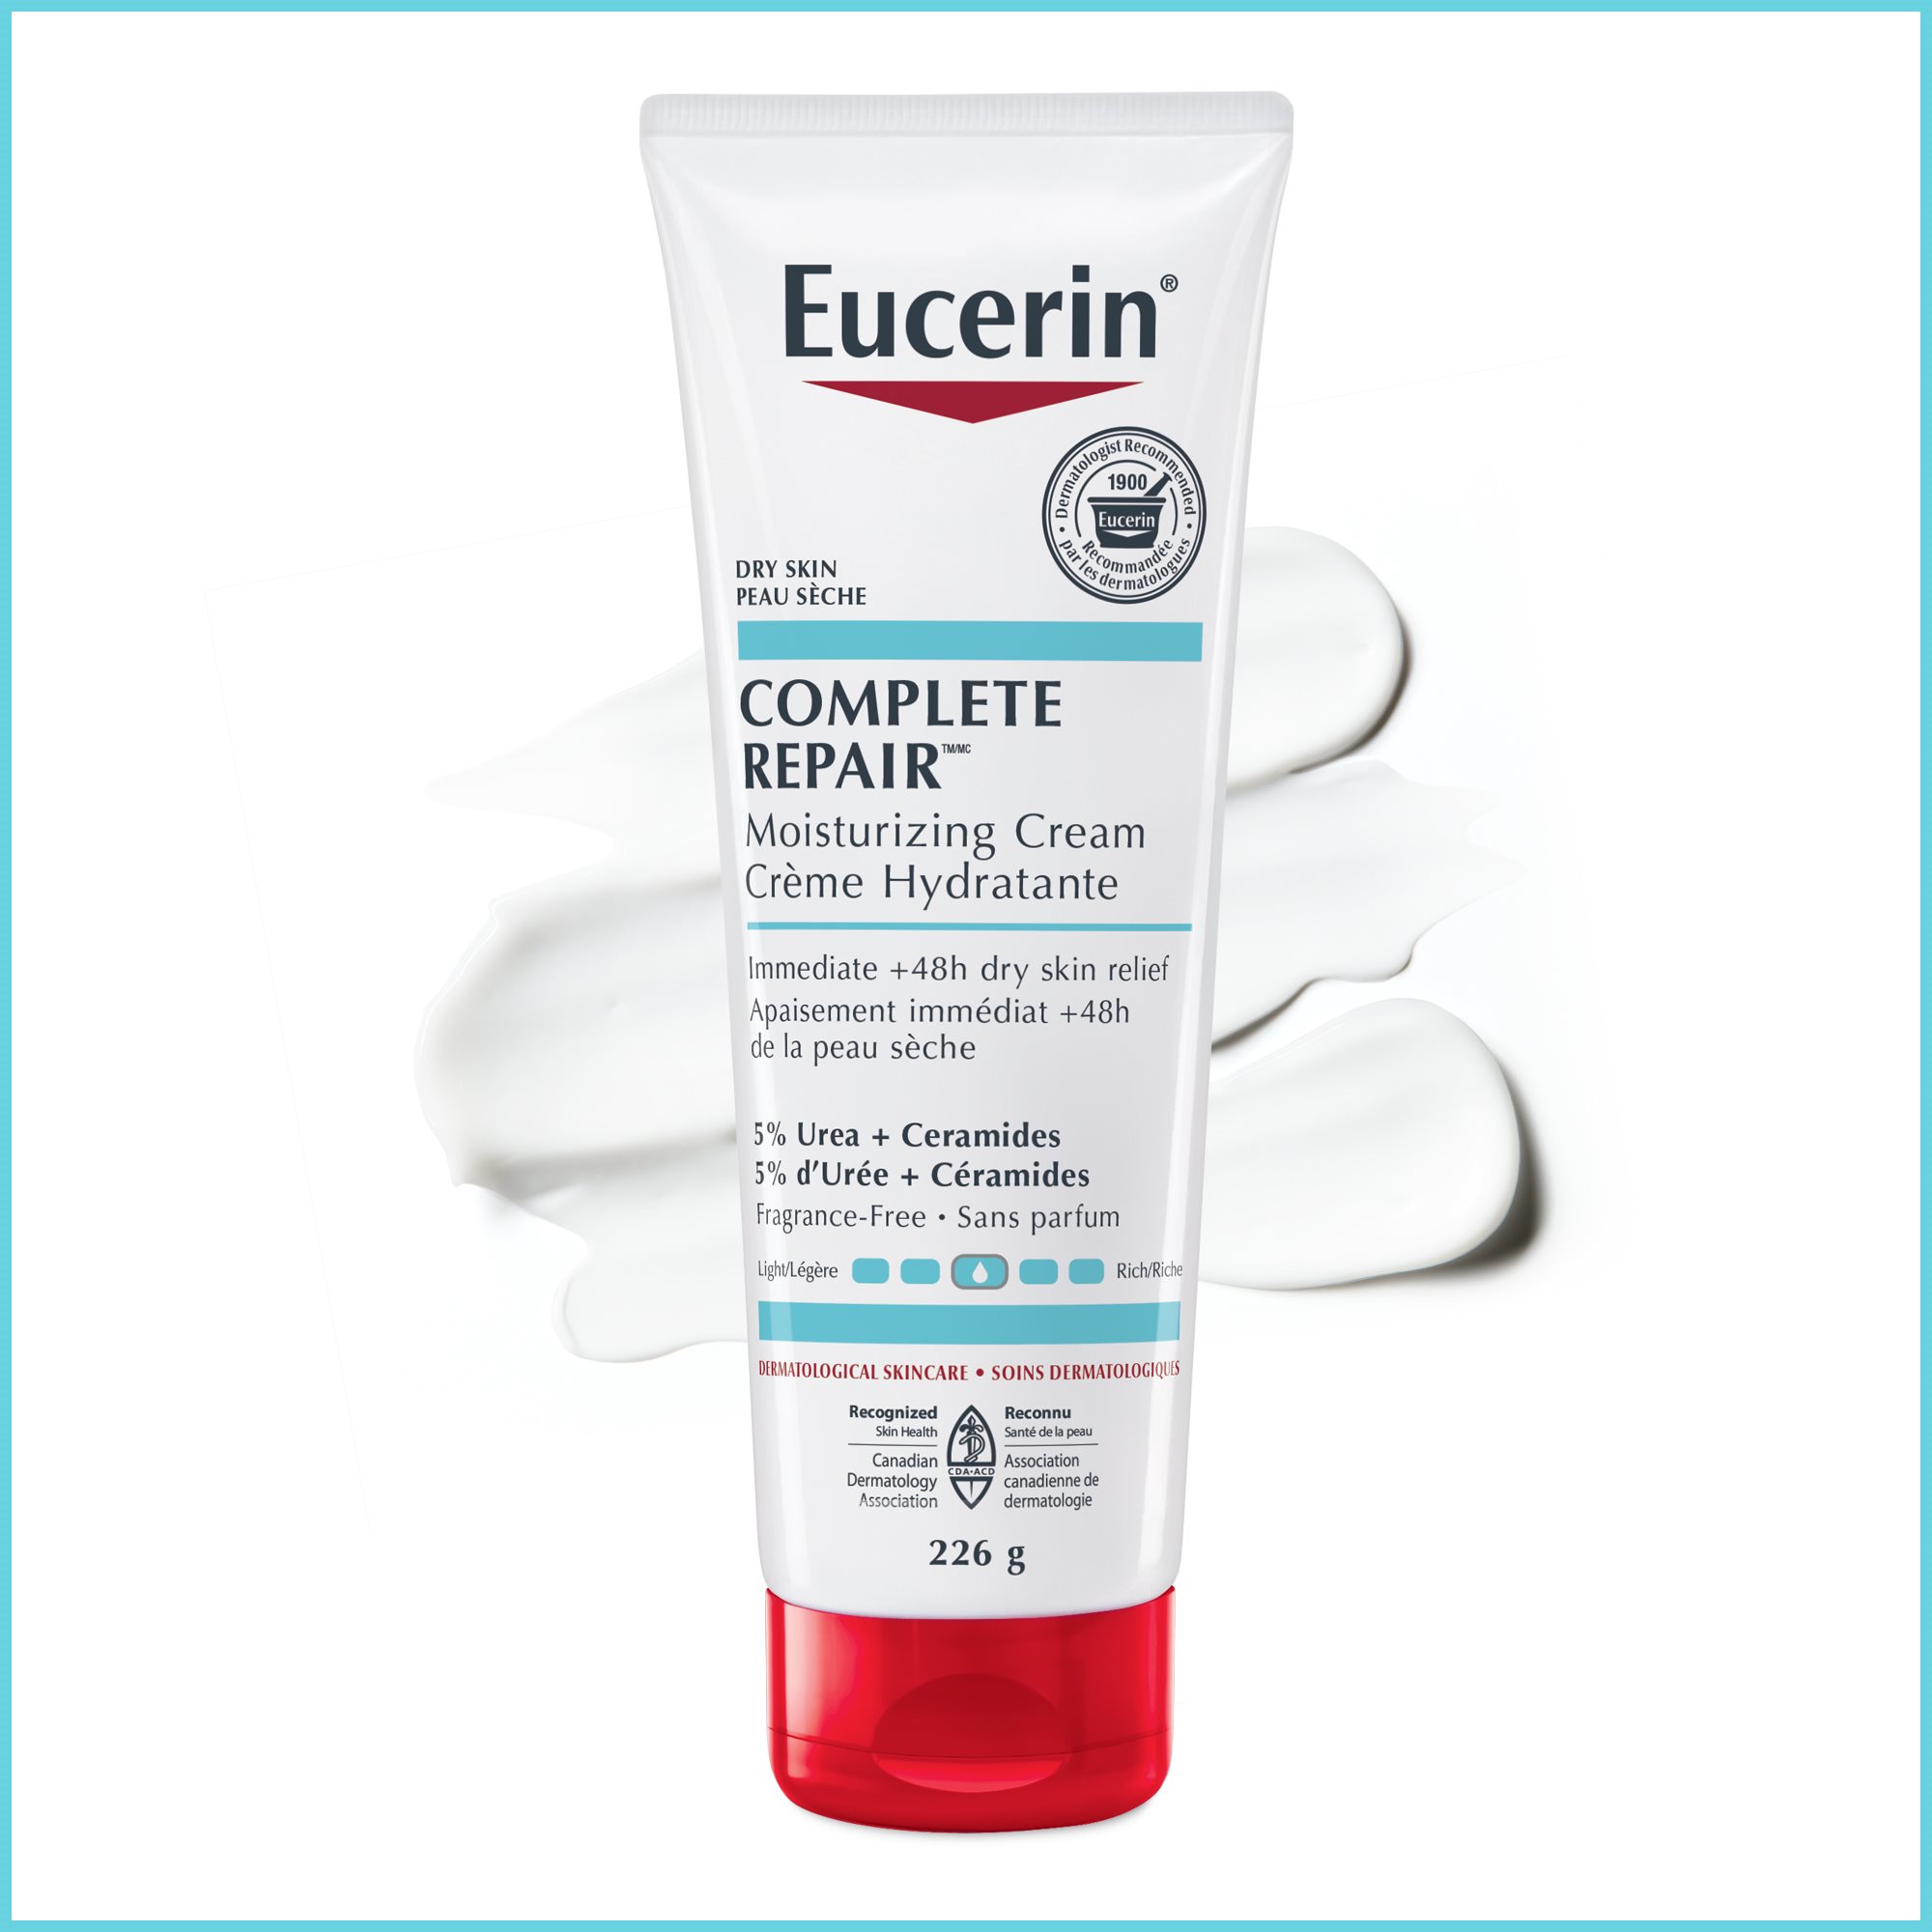 Closeup view of Eucerin Complete Repair Cream against a white surface with product spread behind it.